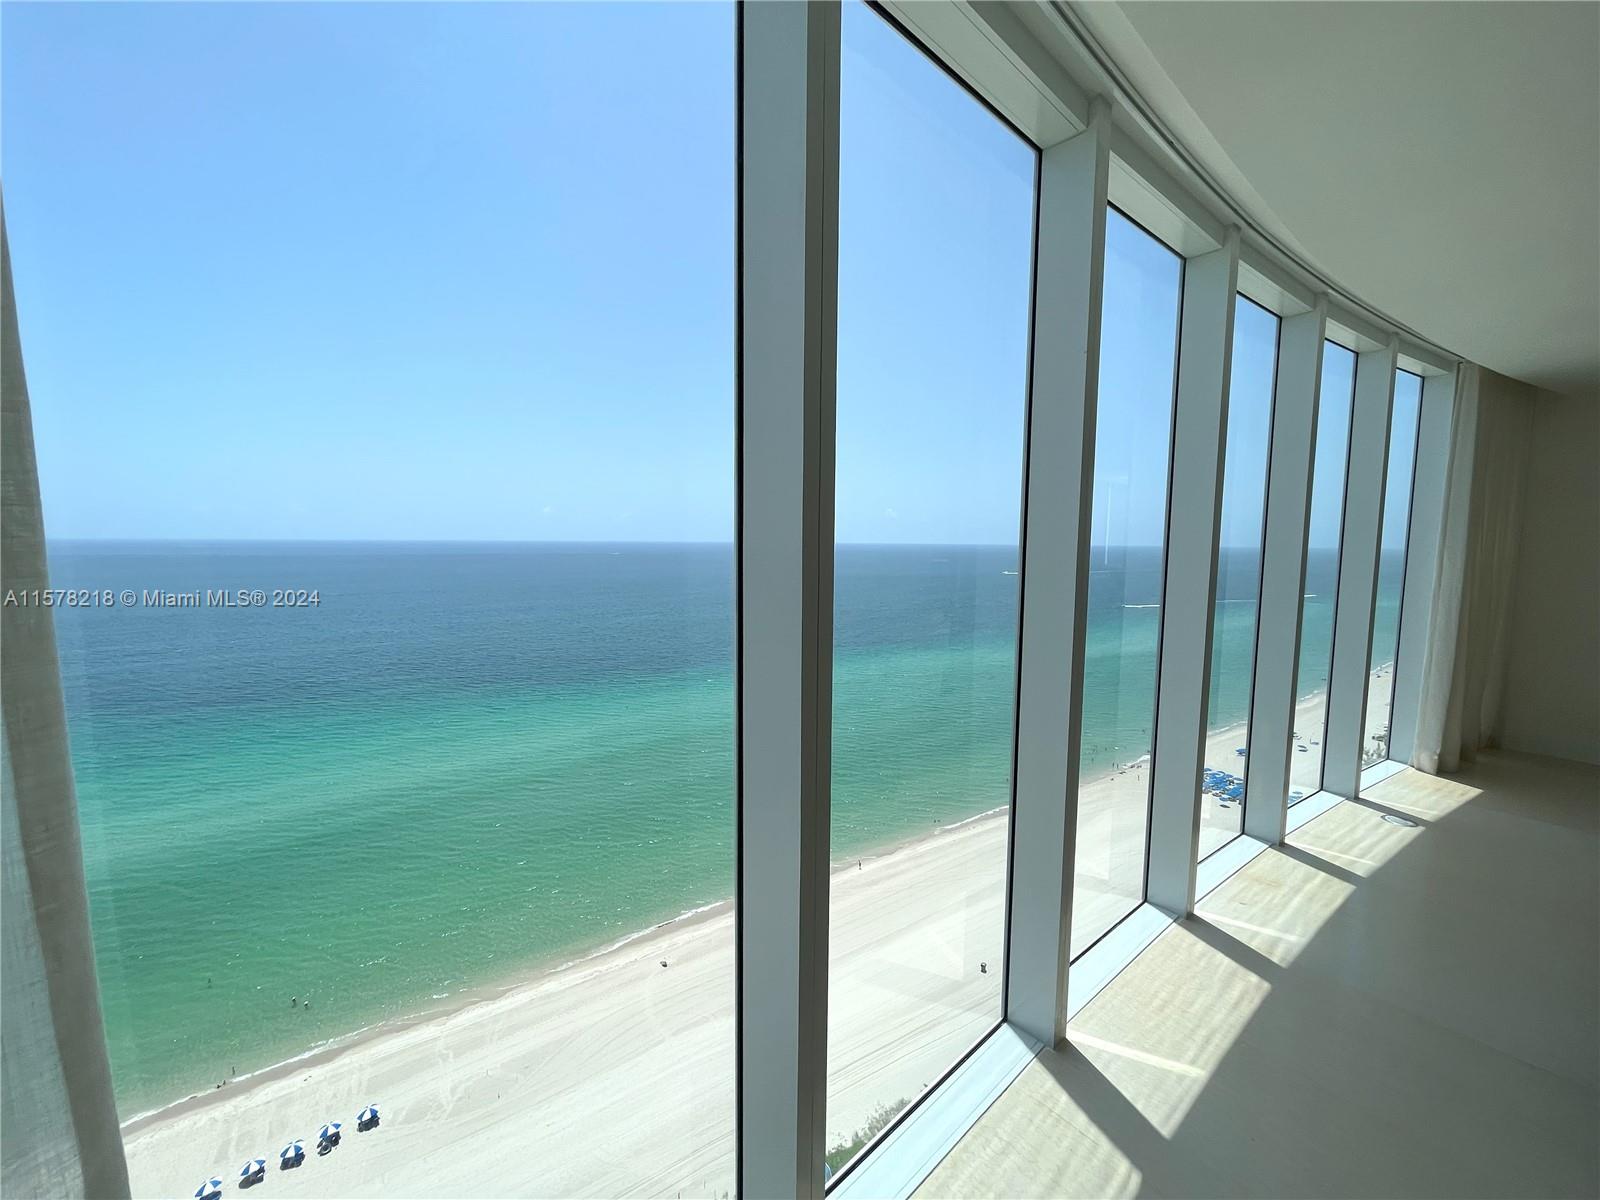 Stunning Ocean & intracoastal views, with 4 beds, 1 den/office, 1 maid quarters, 4 full Bathrooms 1 powder room. This condo comes fully furnished!! was design by the interior designer Deborah Wecselman Design. Great Location in sunny Isles beach, has direct access to the ocean with so many choices to good restaurants in the area, shopping, social life, great schools all close to home. The building has many amenities like spa, Gym, pool restaurant and Full Concierge, chair and umbrellas for the beach, etc.